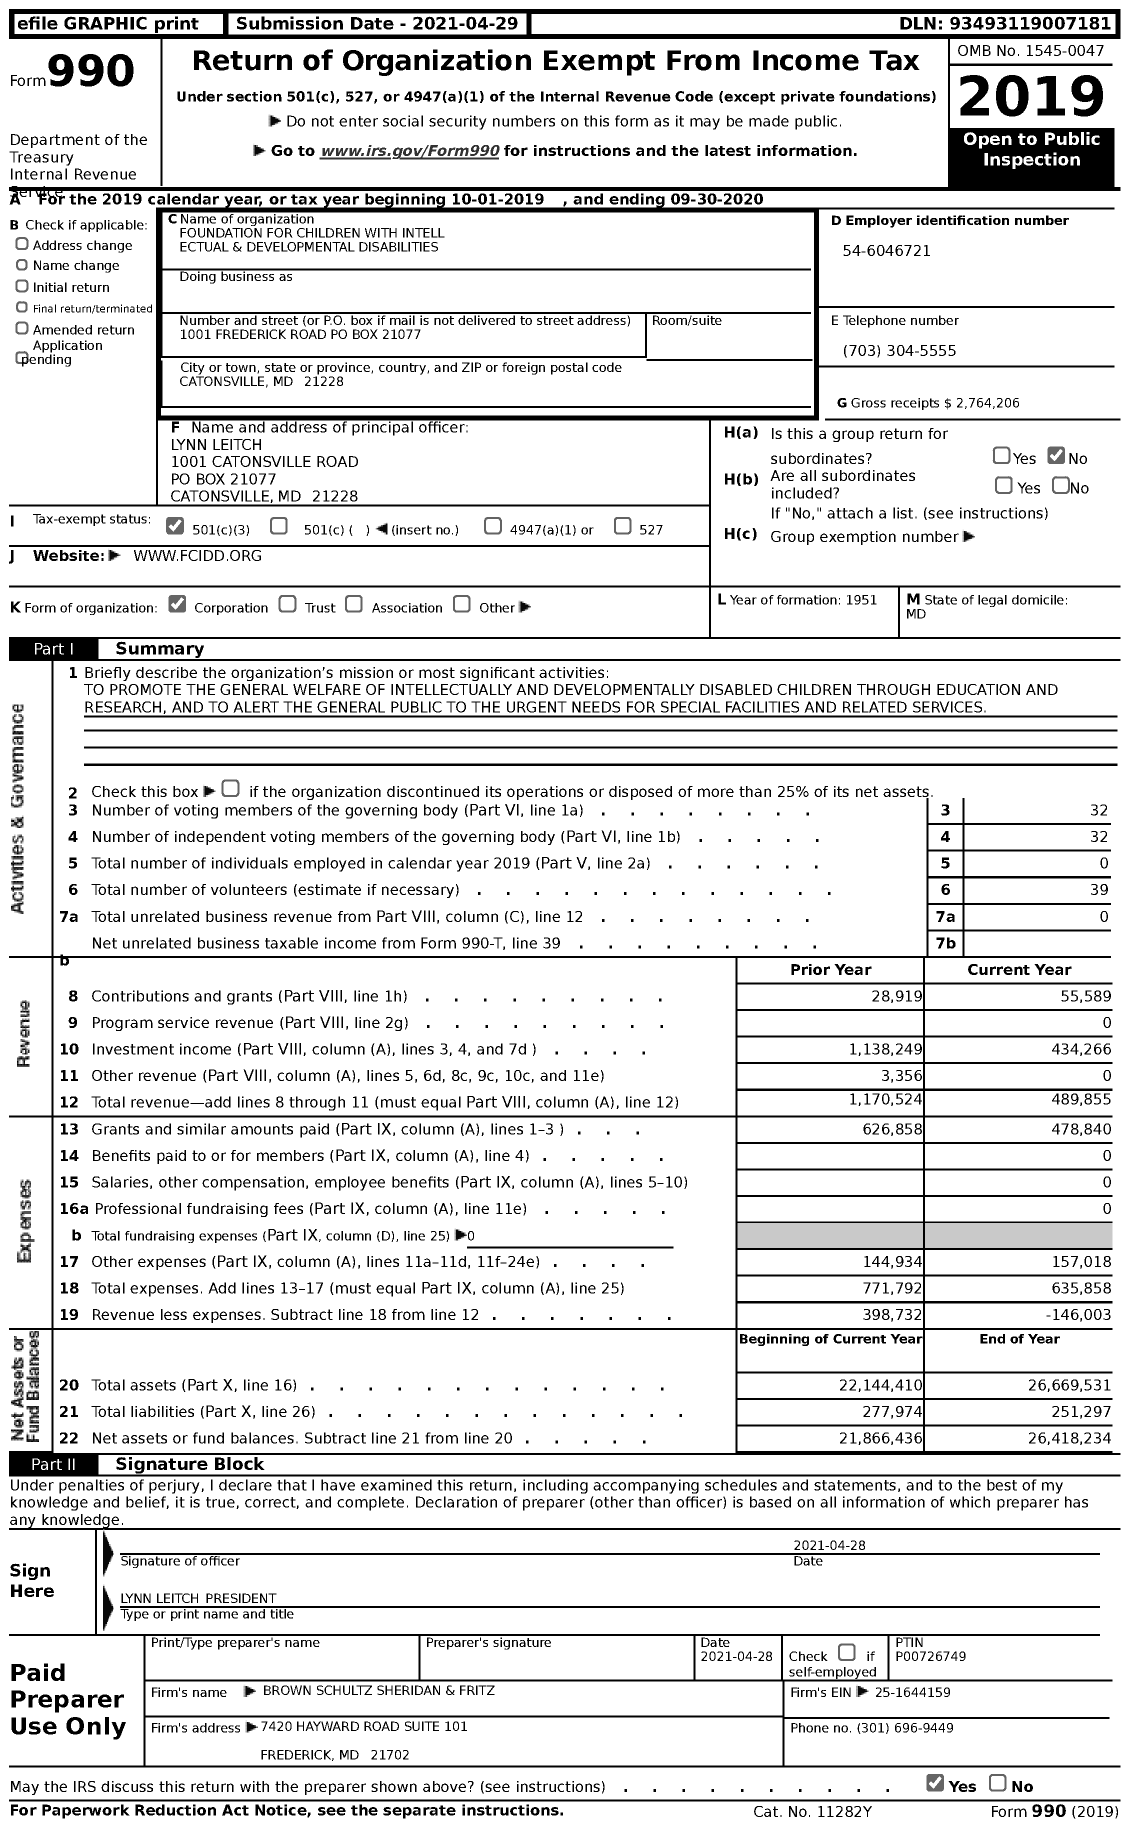 Image of first page of 2019 Form 990 for Foundation for Children with Intell Ectual and Developmental Disabilities